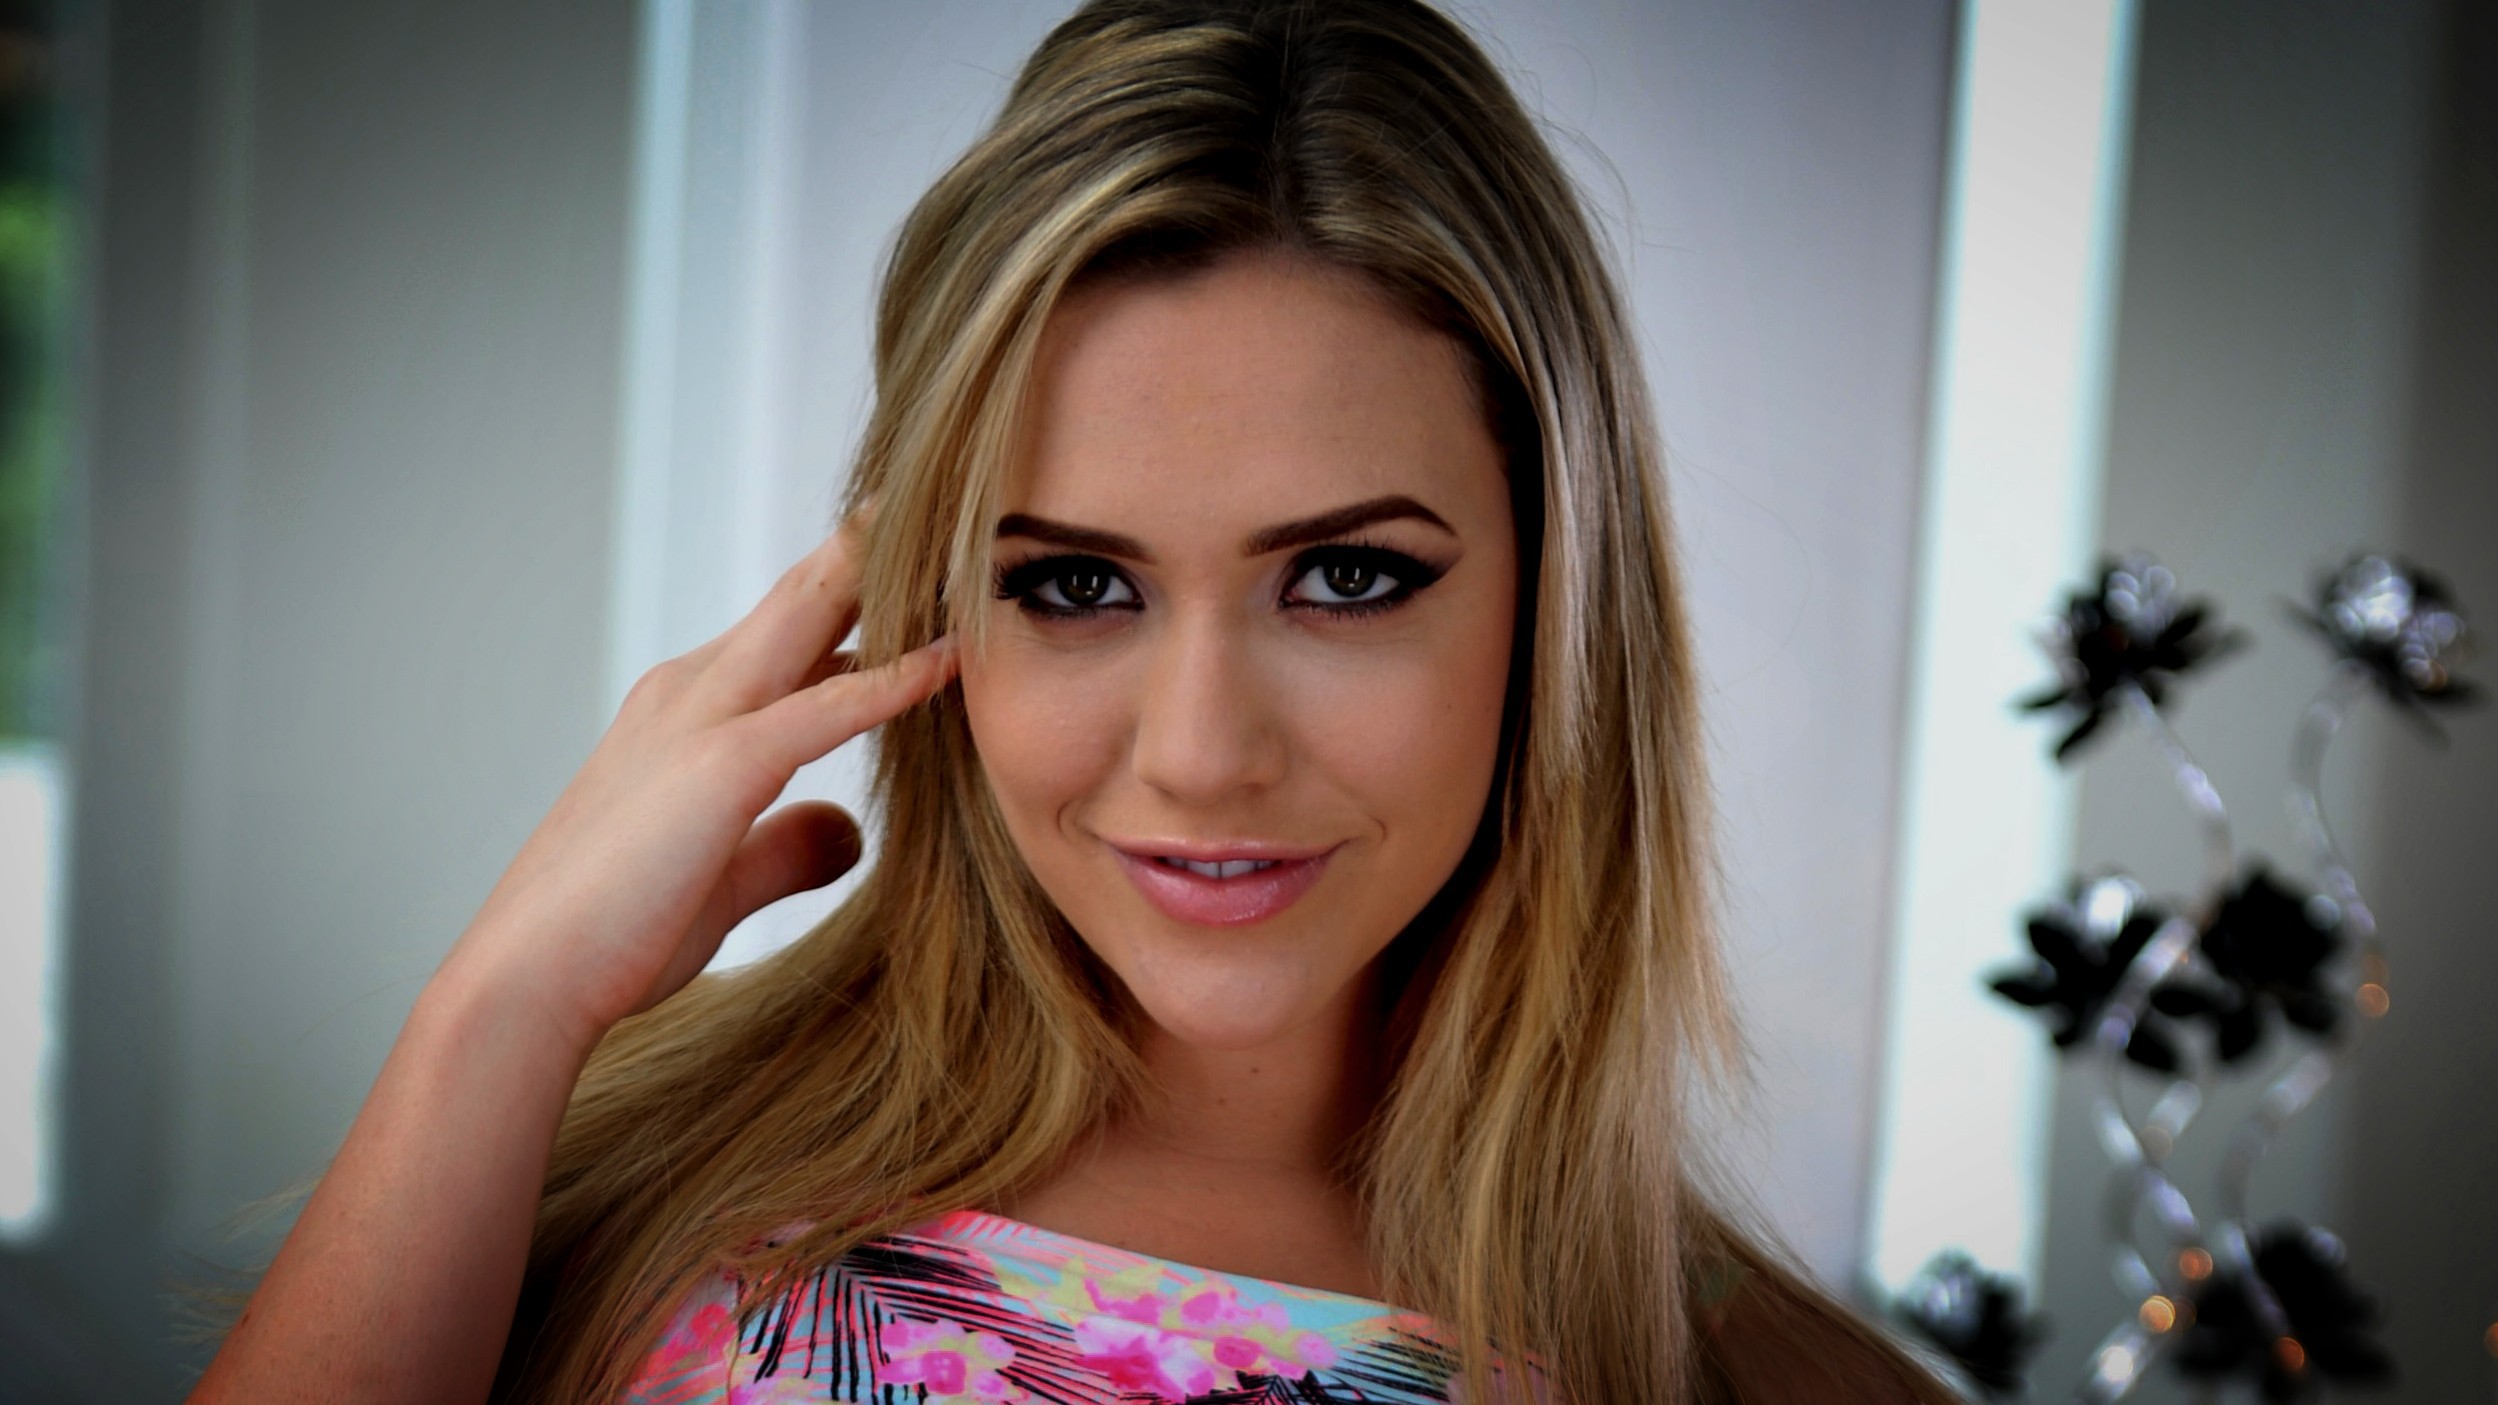 Mia Malkova loves fantasy fiction, including Game of Thrones and Wizards First Rule. 